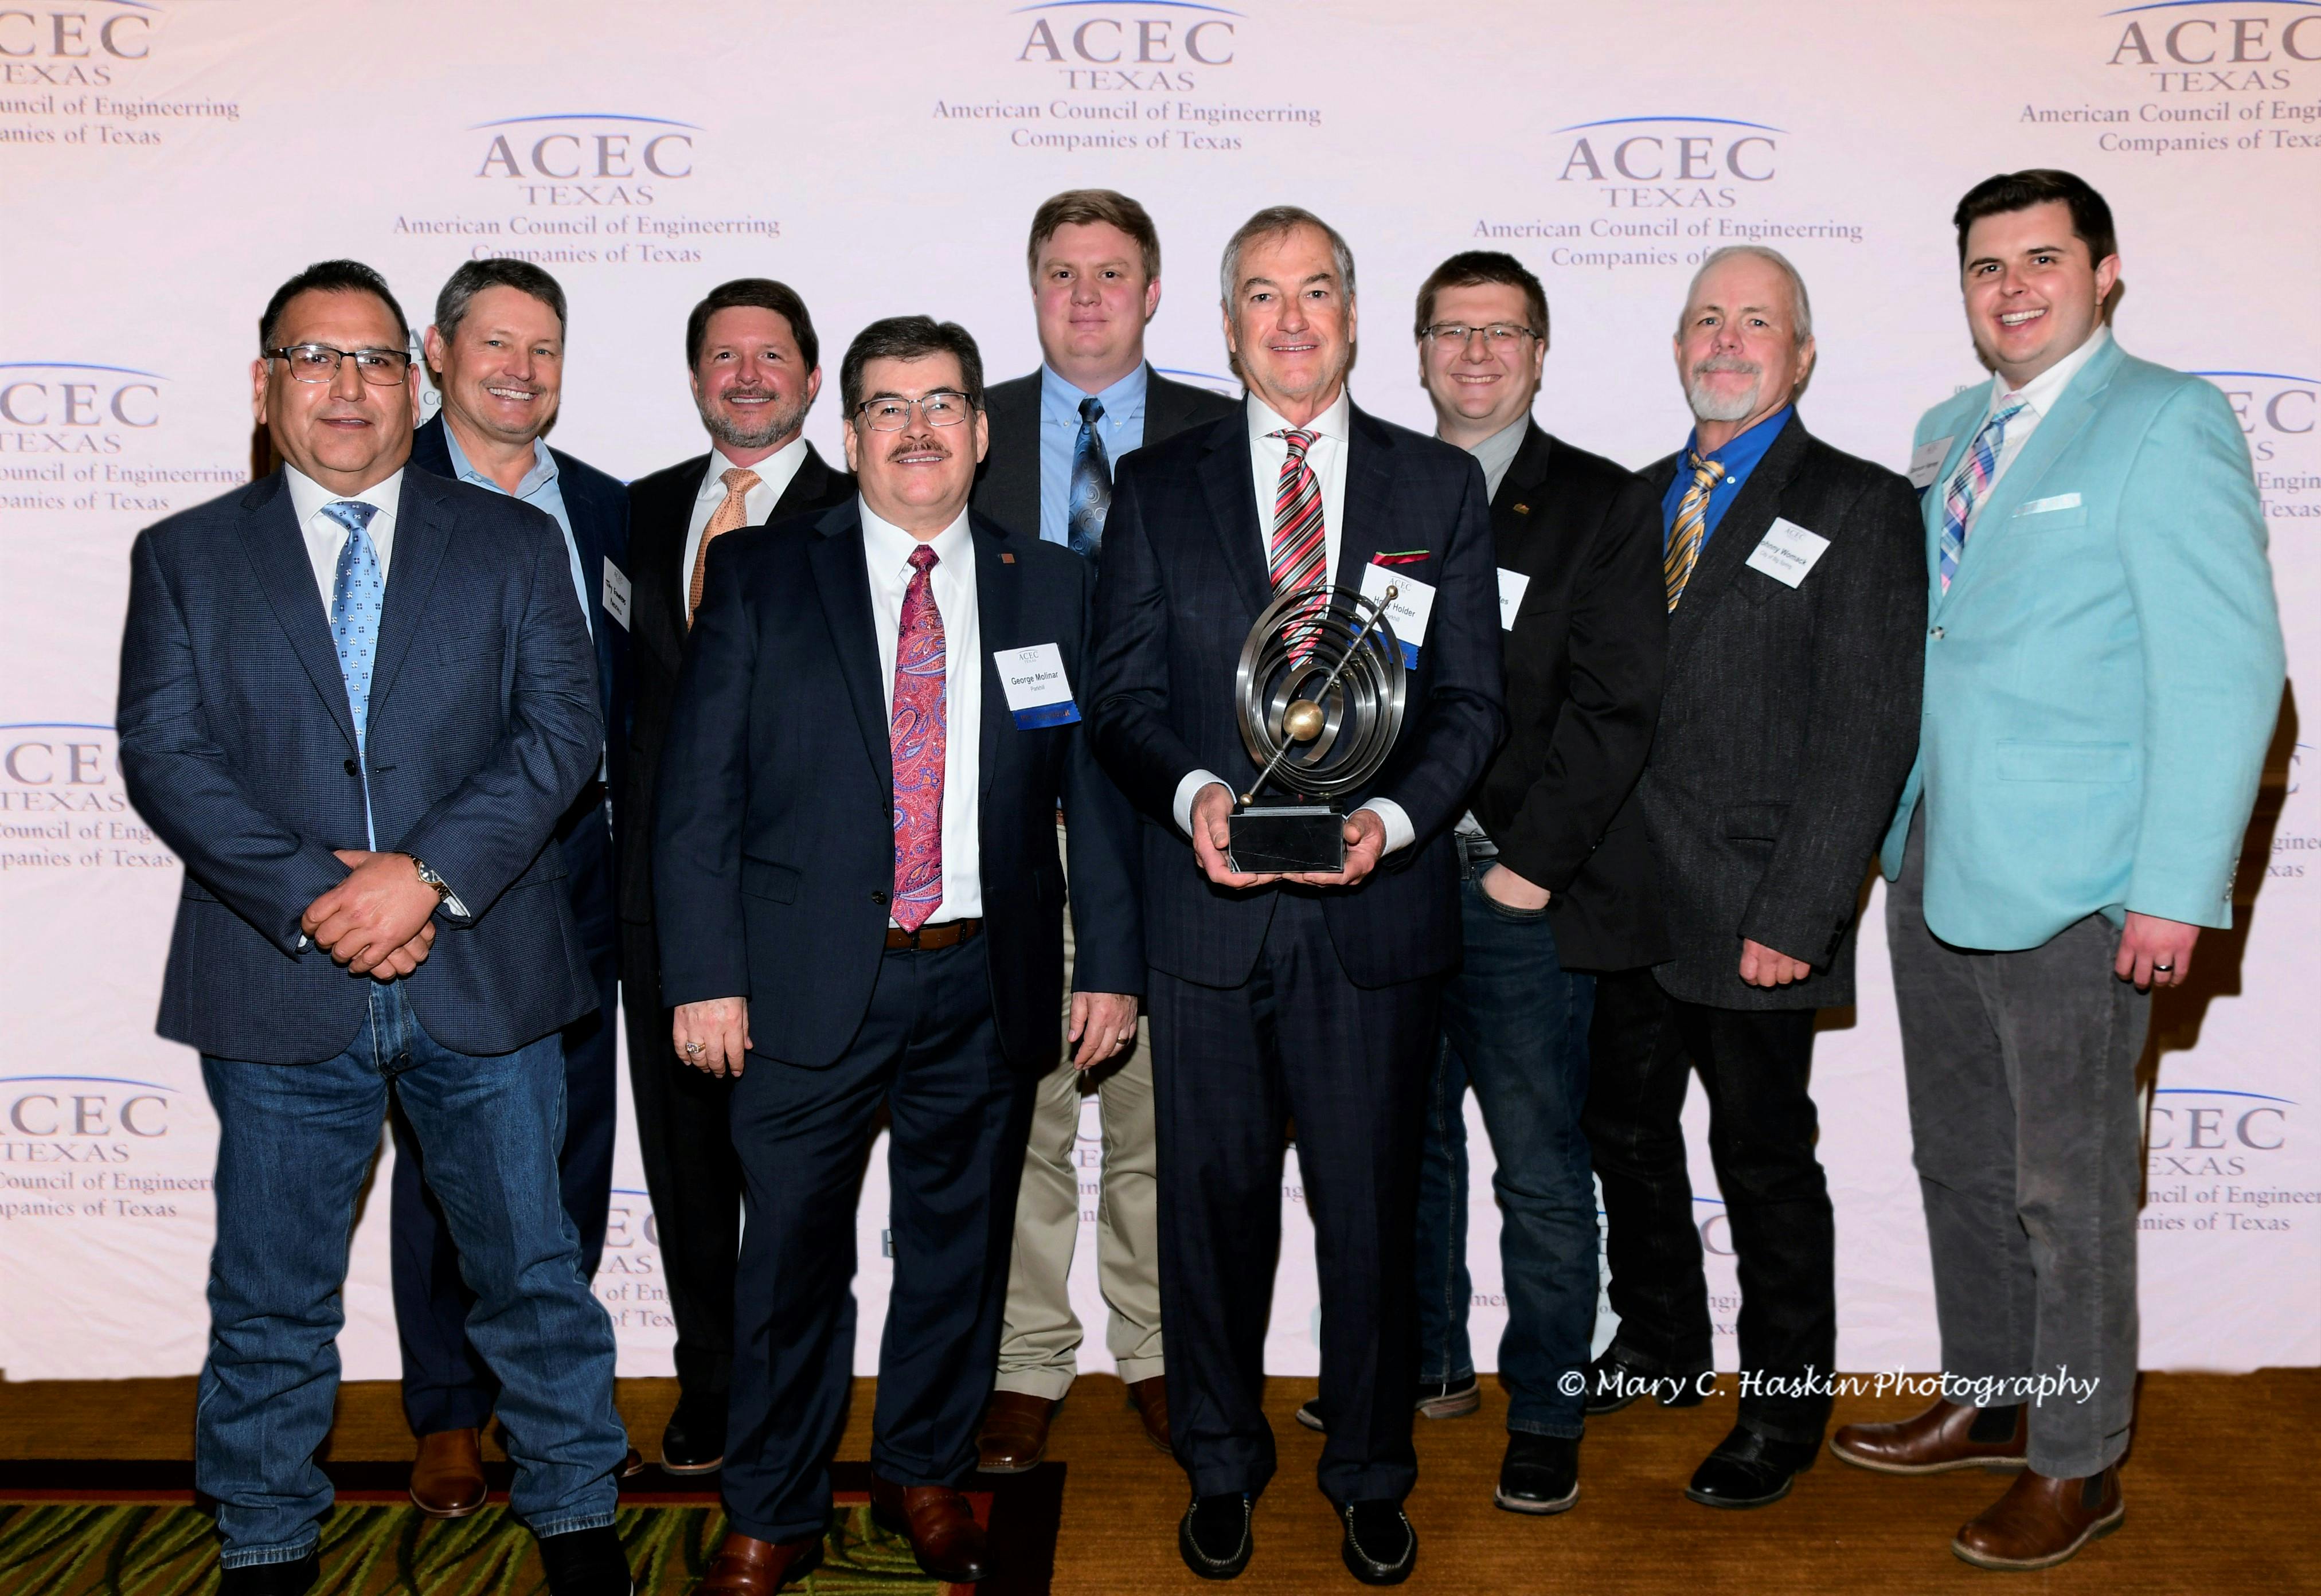 Big Sandy Draw MSW Landfill Awarded ACEC Texas 2022 Gold Medal for Engineering Excellence